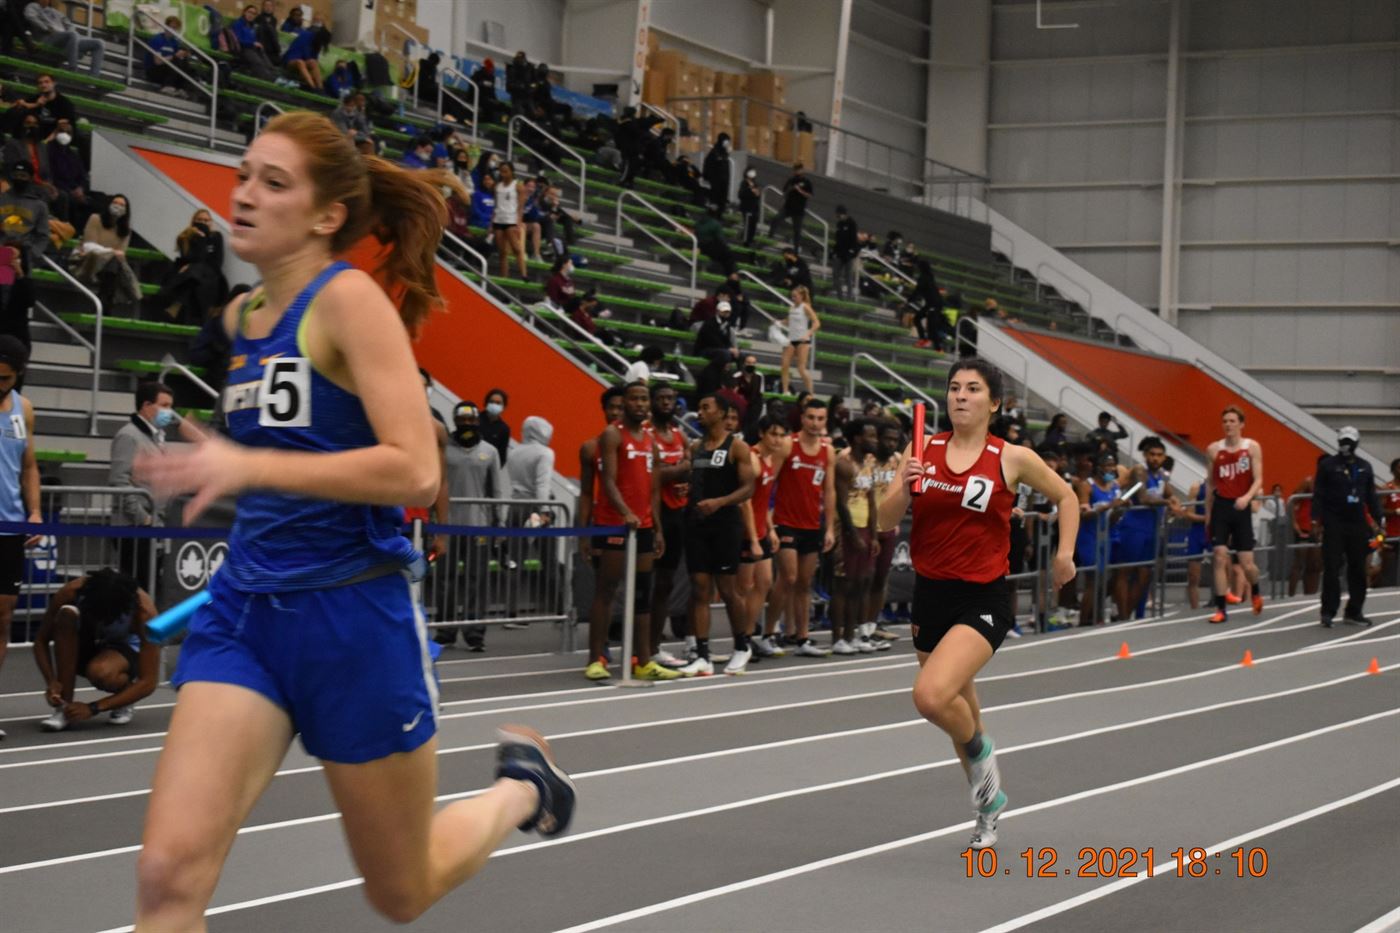 Emily Albright competes in the 400-meter relay. Photo courtesy of Emily Albright